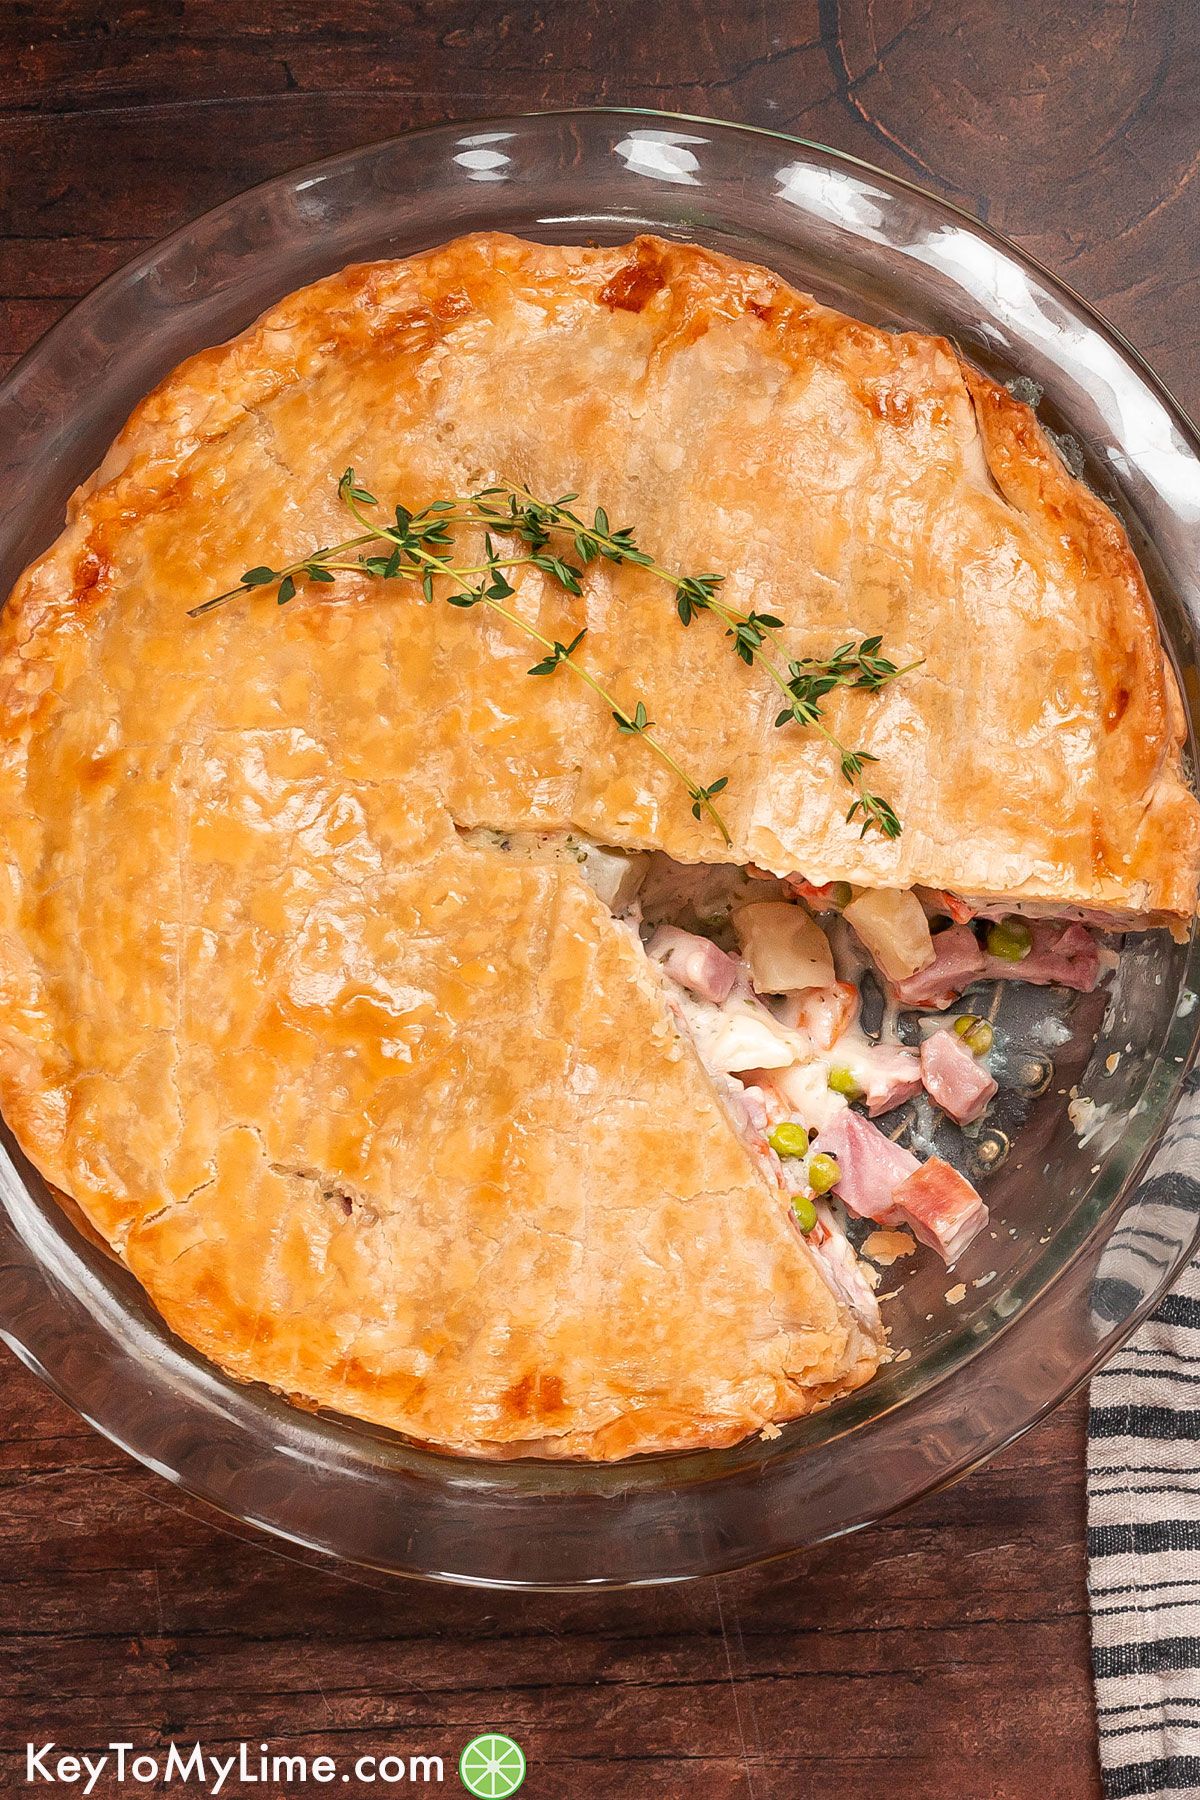 An overhead image of a ham pie with a piece missing in a pie dish.